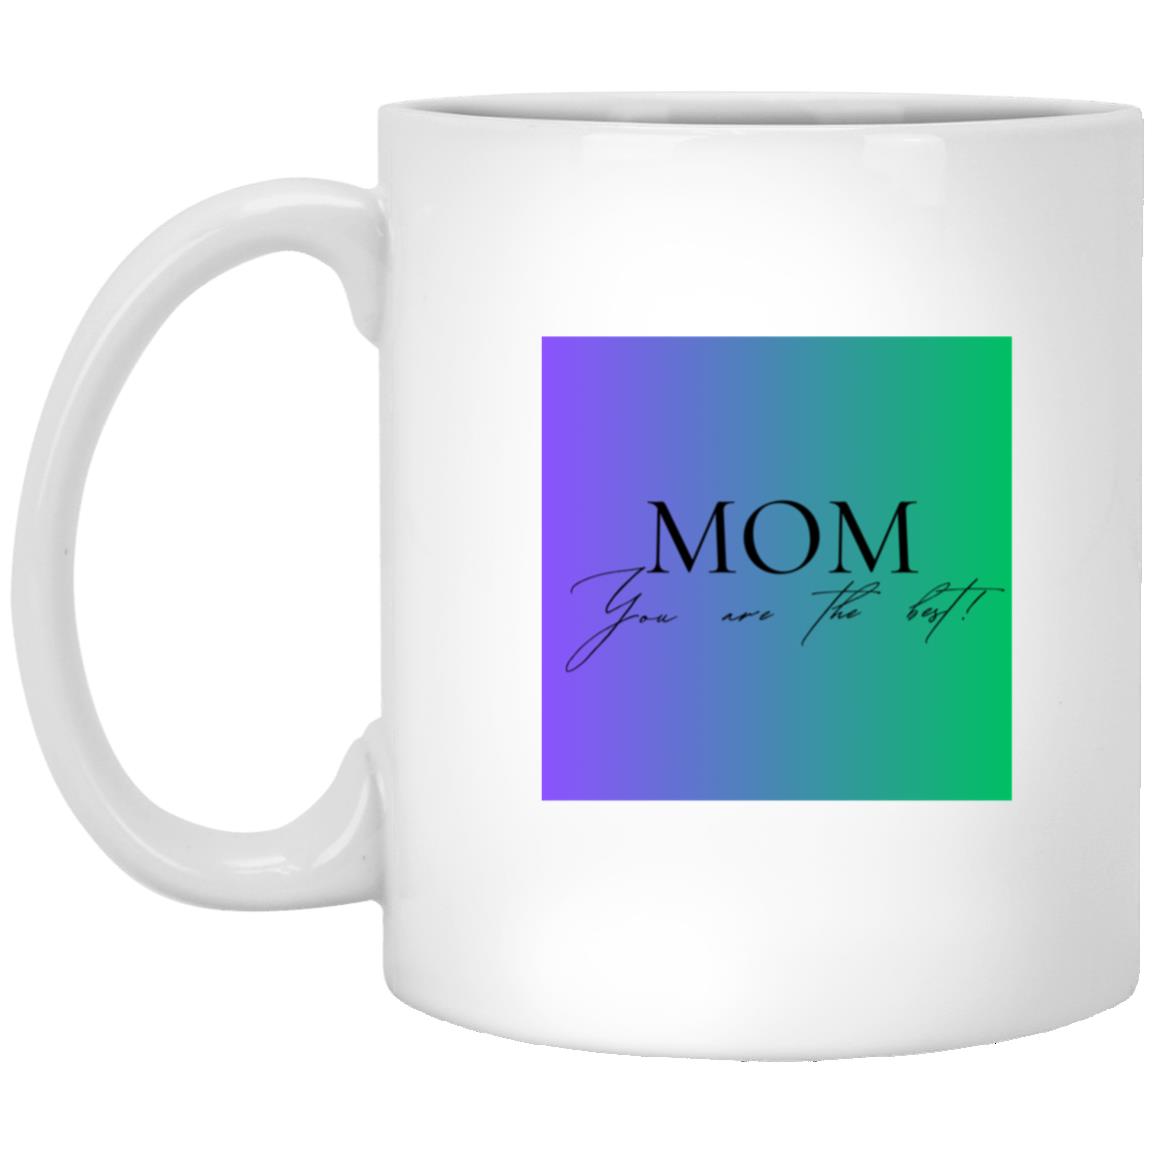 MOM You are the Best - White Ceramic Mugs Style 13